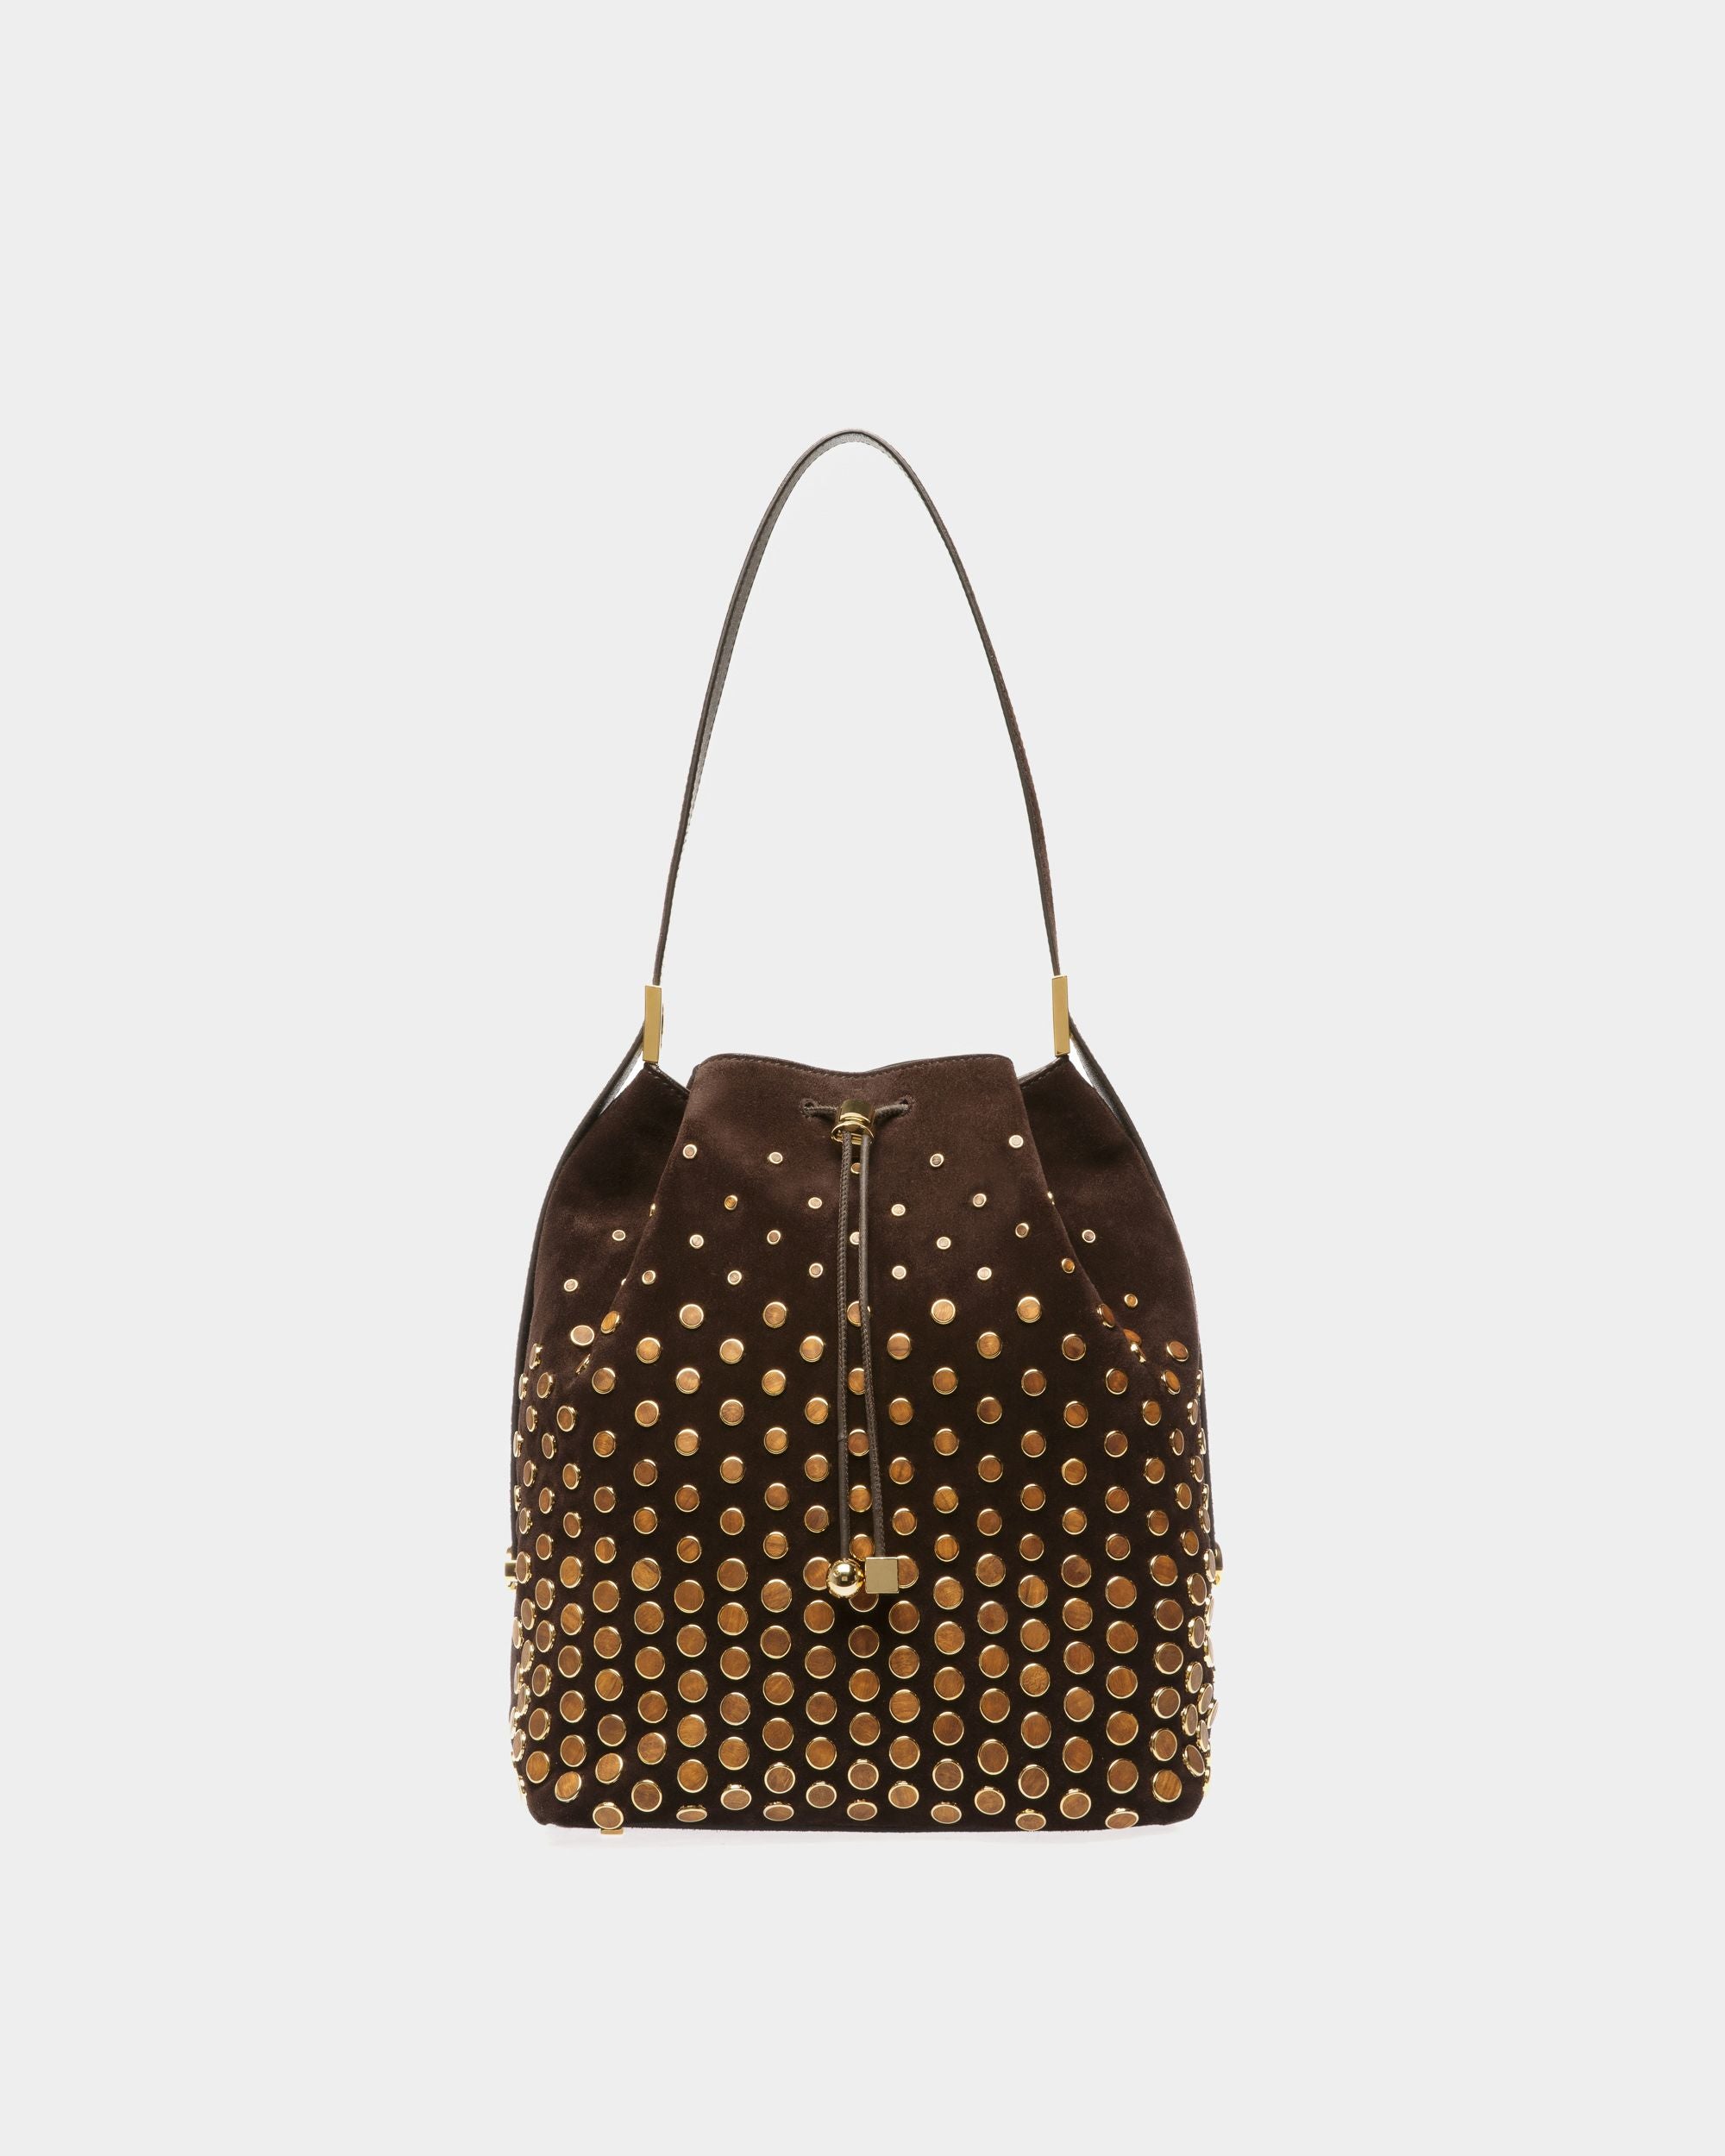 Block Tabo | Women's Bag | Brown Leather | Bally | Still Life Front